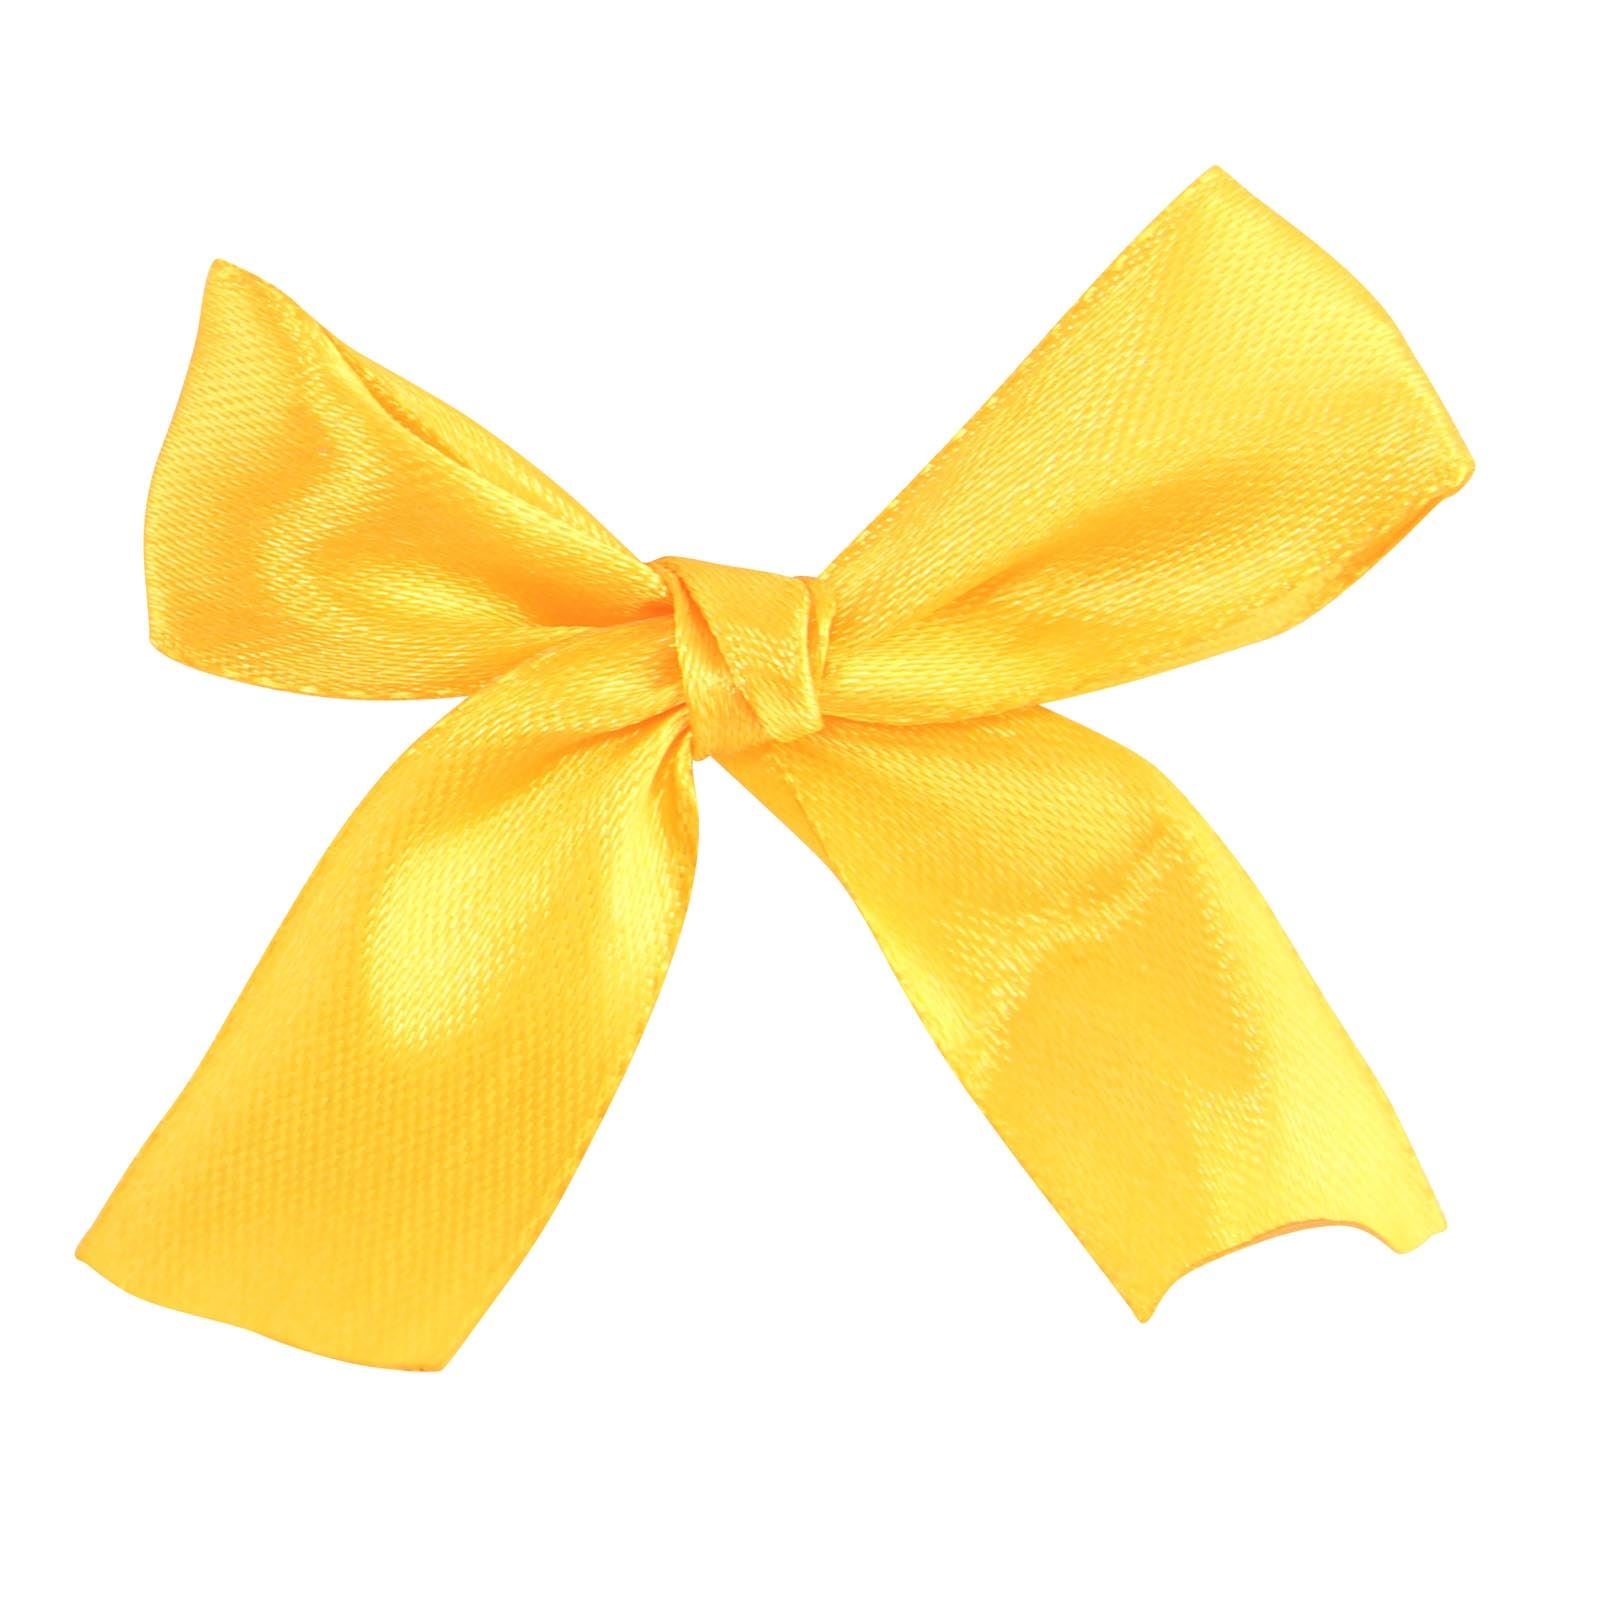 14x Packs 20mm Satin Ready Made Bows - Pack of 25 bows - Set of 13 Colours